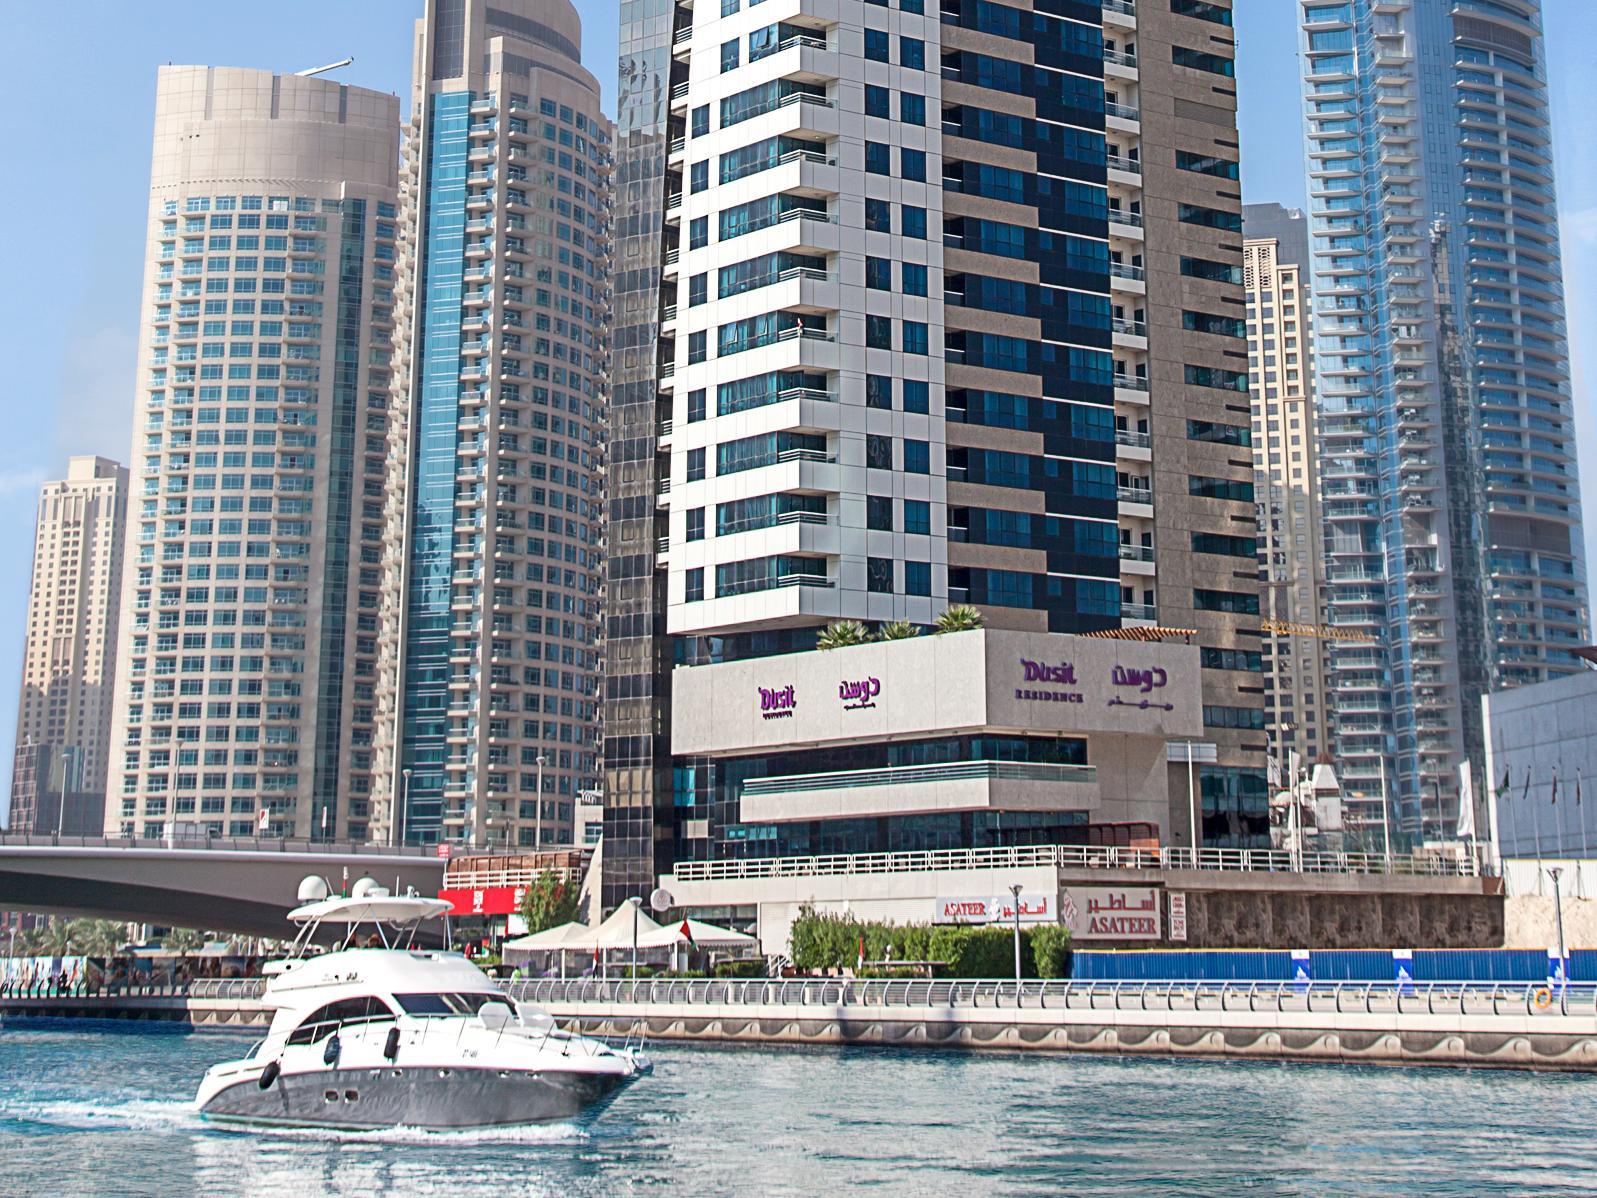 Dusit Residence Dubai Marina Hotel Emirate of Dubai FAQ 2016, What facilities are there in Dusit Residence Dubai Marina Hotel Emirate of Dubai 2016, What Languages Spoken are Supported in Dusit Residence Dubai Marina Hotel Emirate of Dubai 2016, Which payment cards are accepted in Dusit Residence Dubai Marina Hotel Emirate of Dubai , Emirate of Dubai Dusit Residence Dubai Marina Hotel room facilities and services Q&A 2016, Emirate of Dubai Dusit Residence Dubai Marina Hotel online booking services 2016, Emirate of Dubai Dusit Residence Dubai Marina Hotel address 2016, Emirate of Dubai Dusit Residence Dubai Marina Hotel telephone number 2016,Emirate of Dubai Dusit Residence Dubai Marina Hotel map 2016, Emirate of Dubai Dusit Residence Dubai Marina Hotel traffic guide 2016, how to go Emirate of Dubai Dusit Residence Dubai Marina Hotel, Emirate of Dubai Dusit Residence Dubai Marina Hotel booking online 2016, Emirate of Dubai Dusit Residence Dubai Marina Hotel room types 2016.